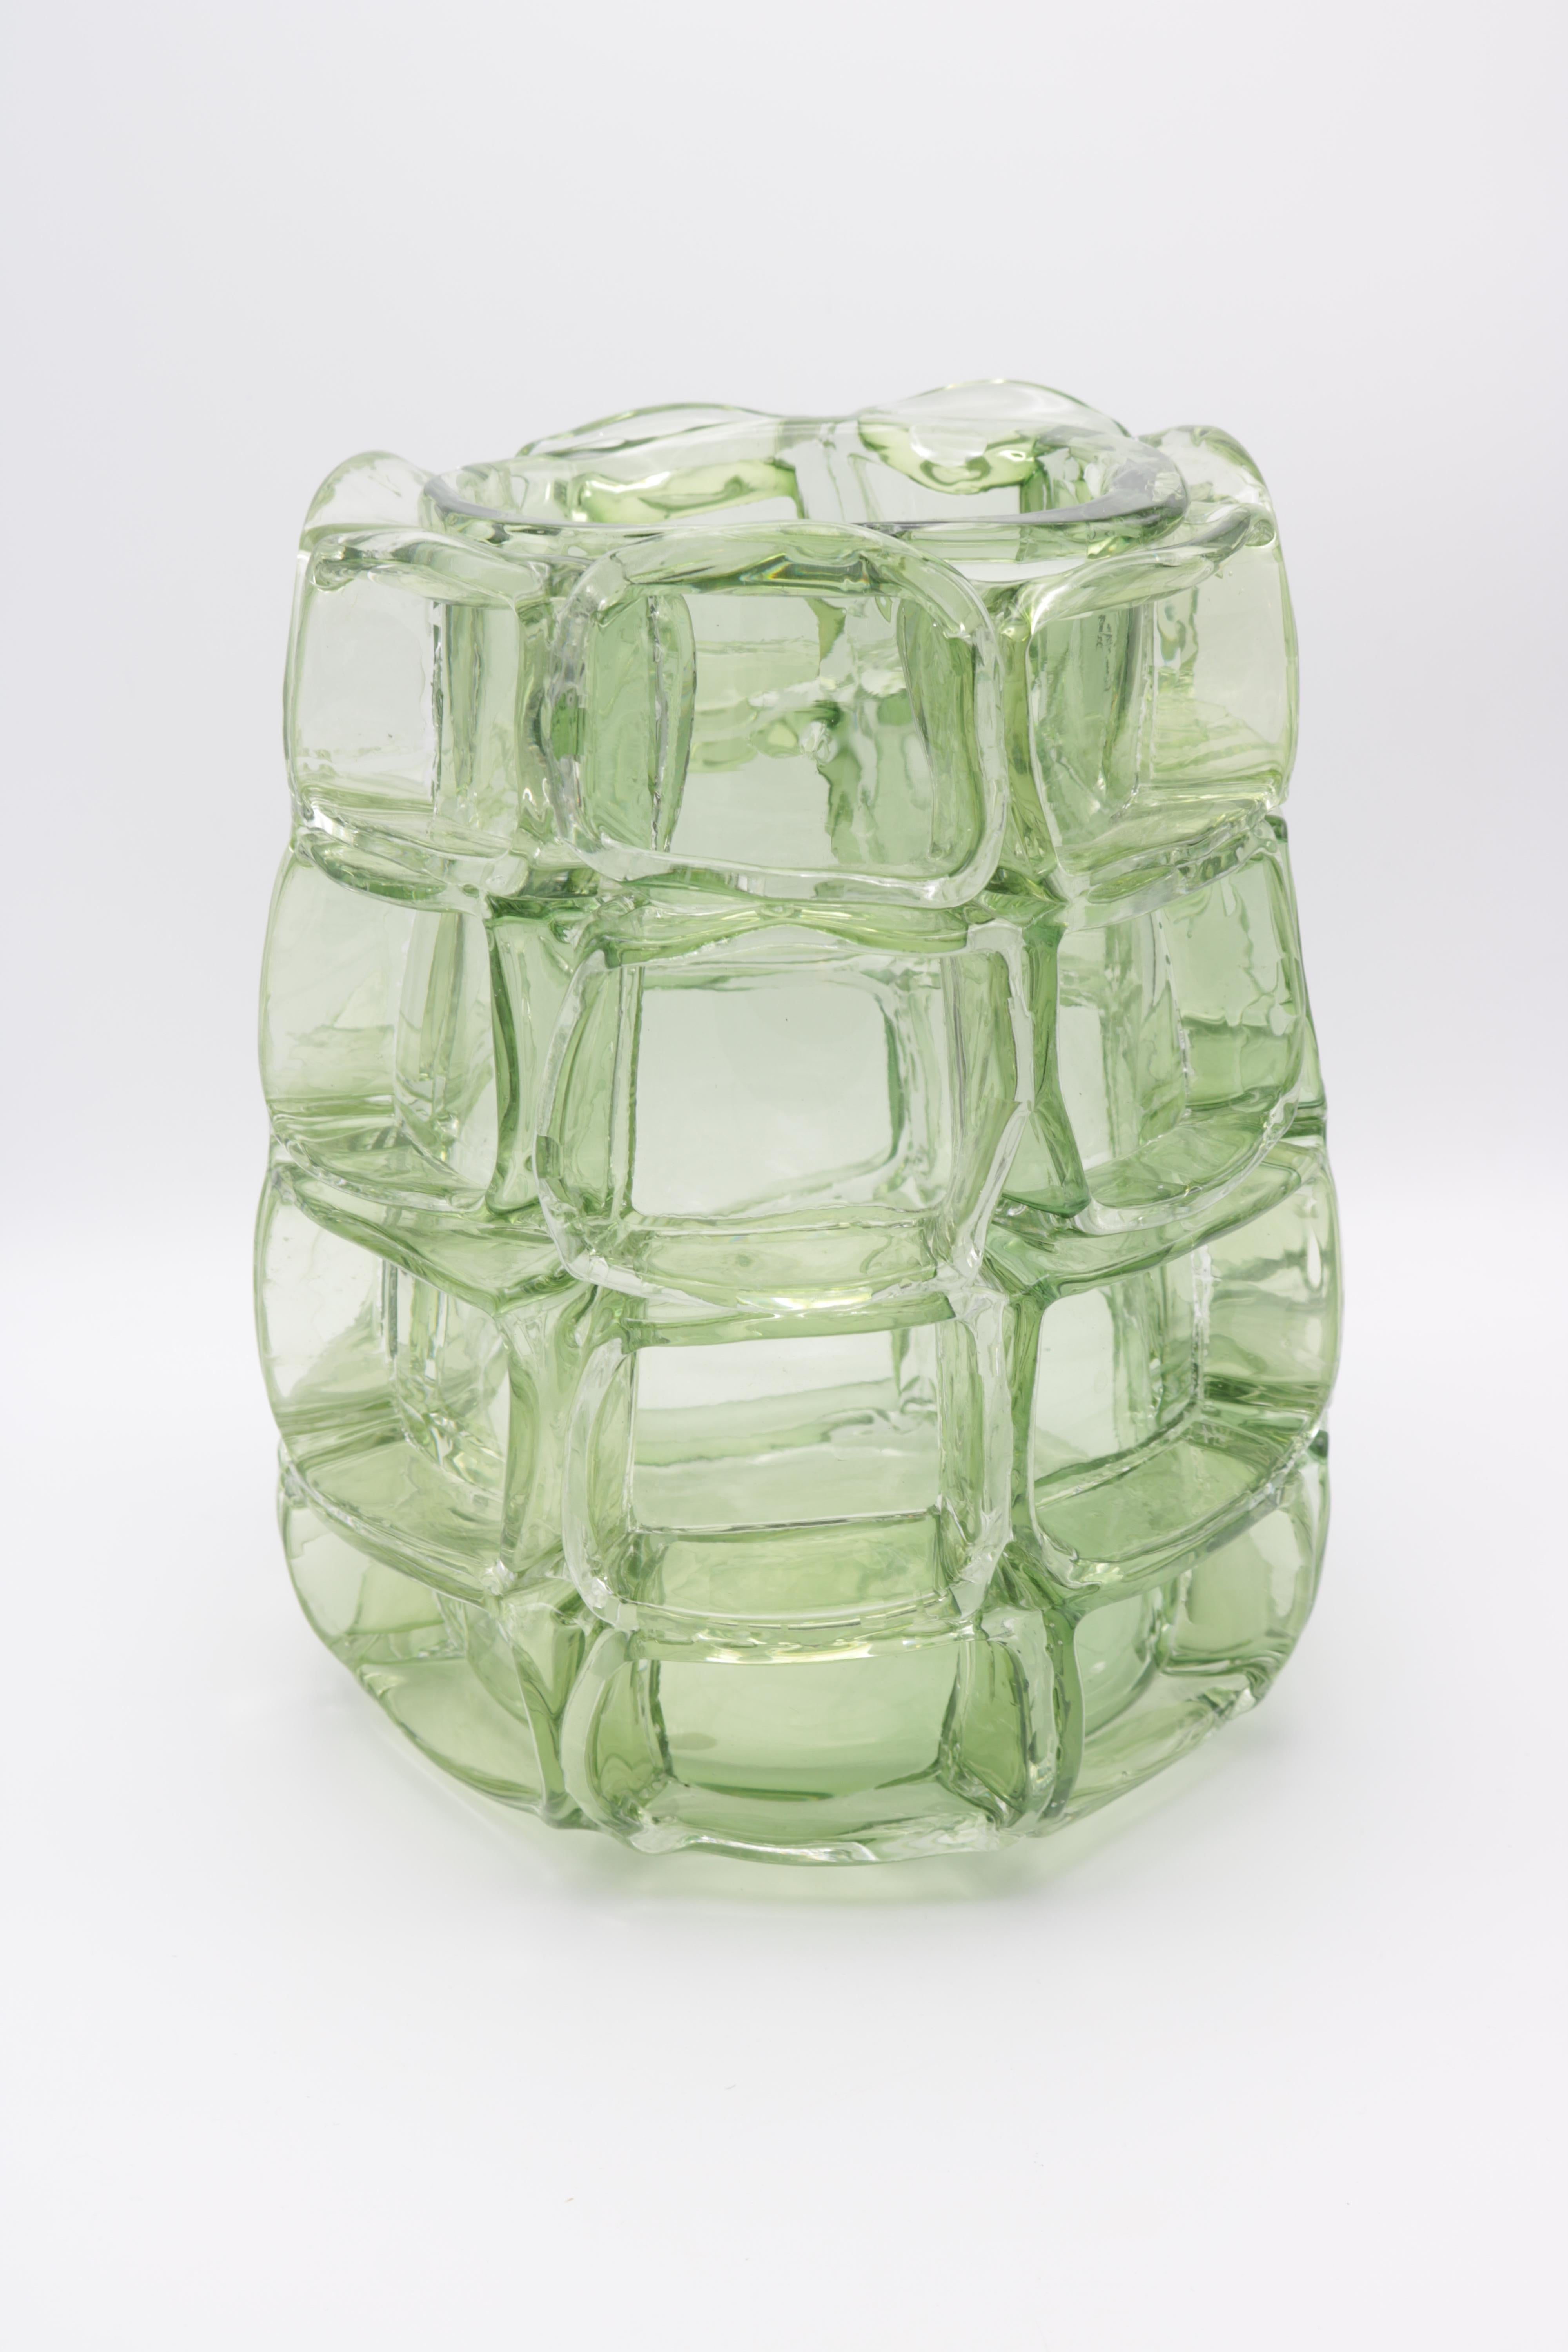 An art glass vase by Martin Potsch. 
Green glass surrounded with square green prunts.
Etched signature on the bottom.